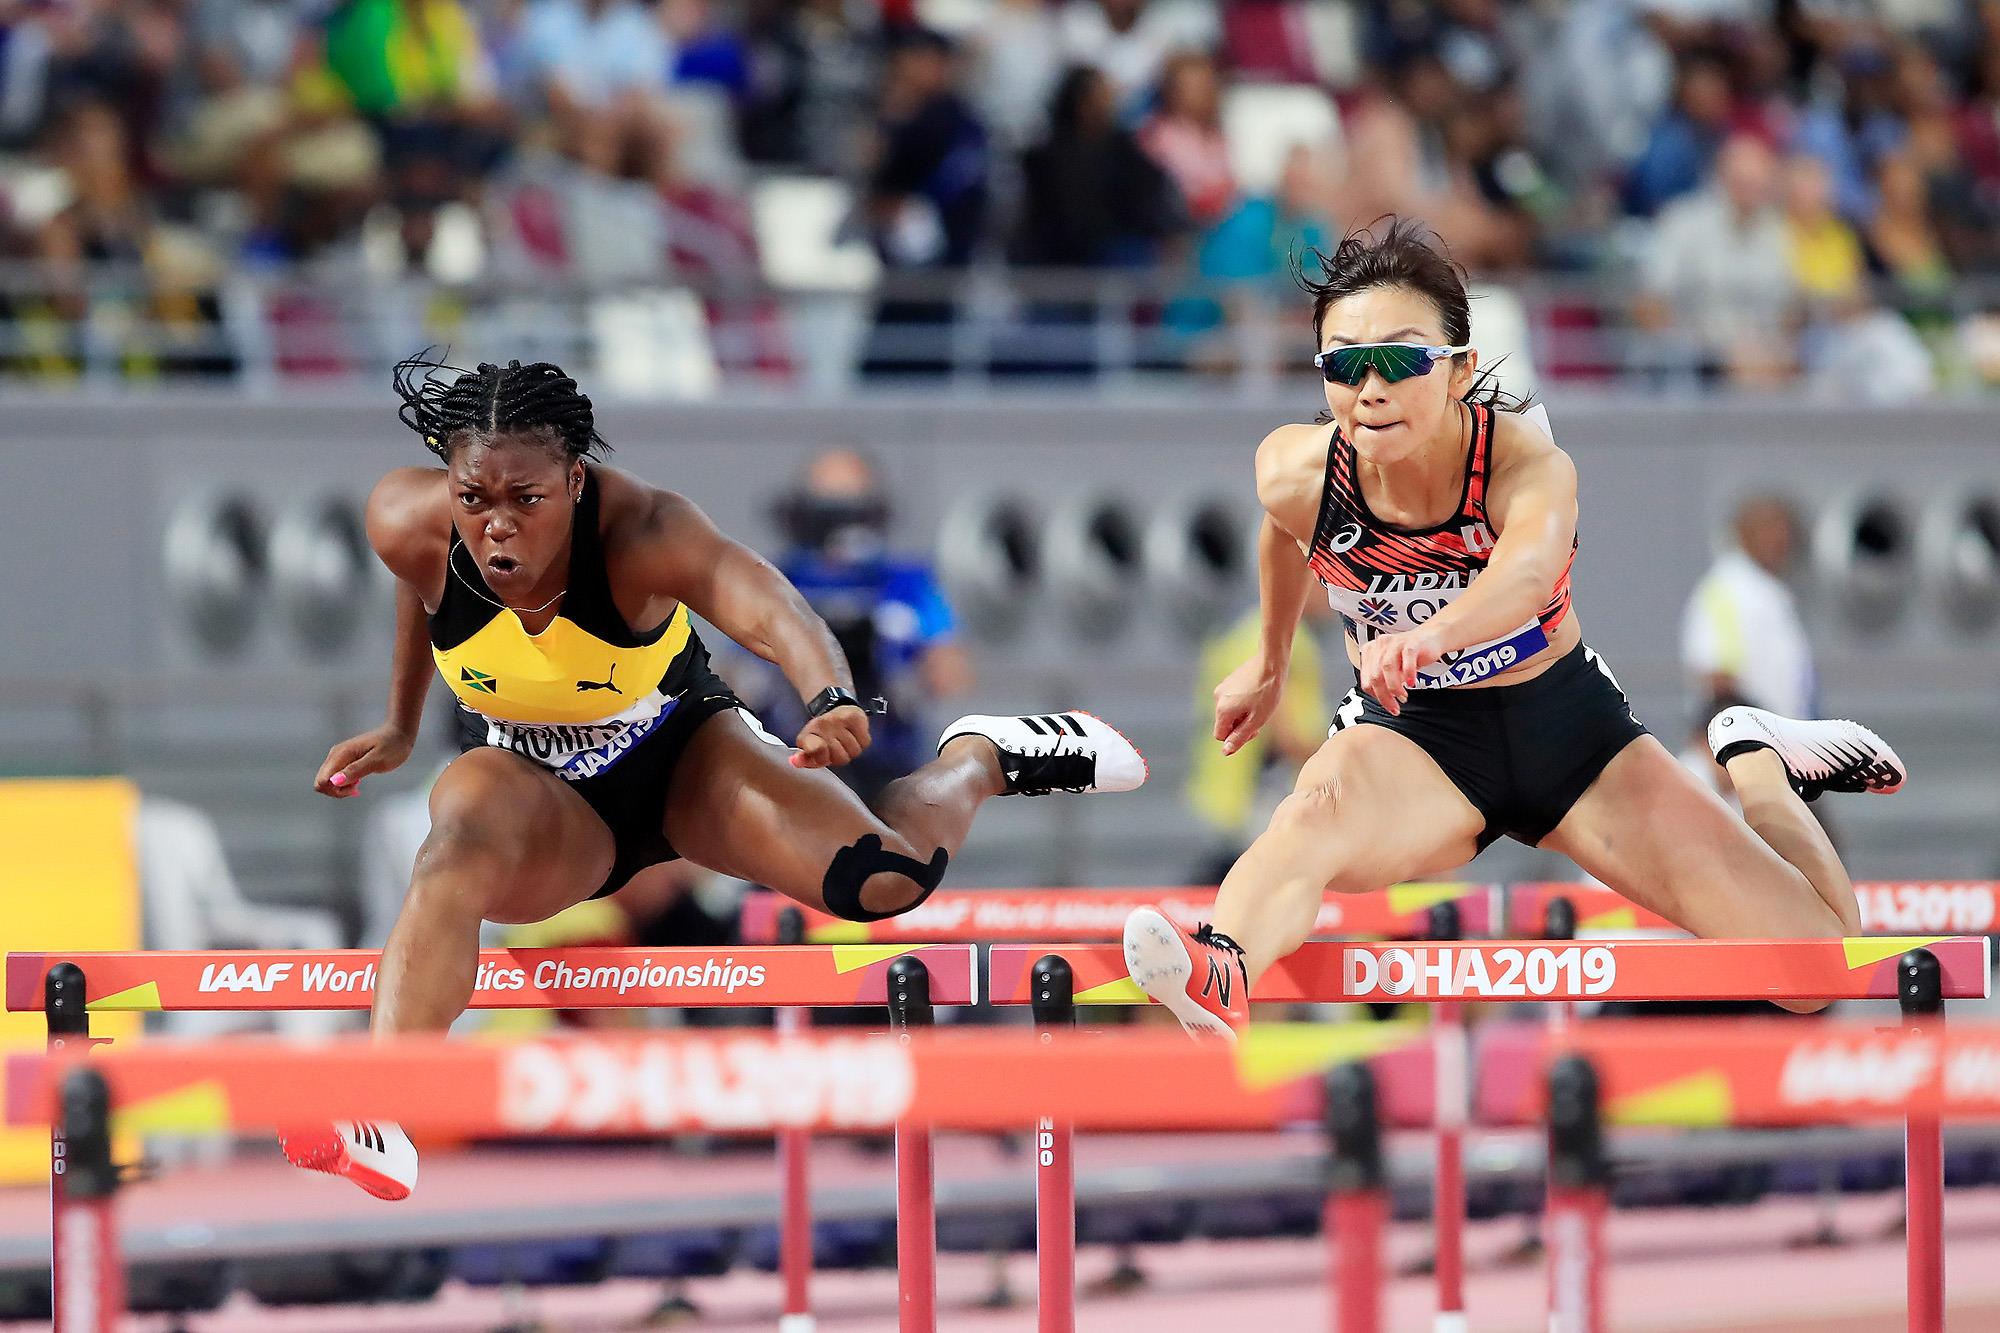  Yanique Thompson and Ayako Kimura in the 100m hurdles (Getty Images)